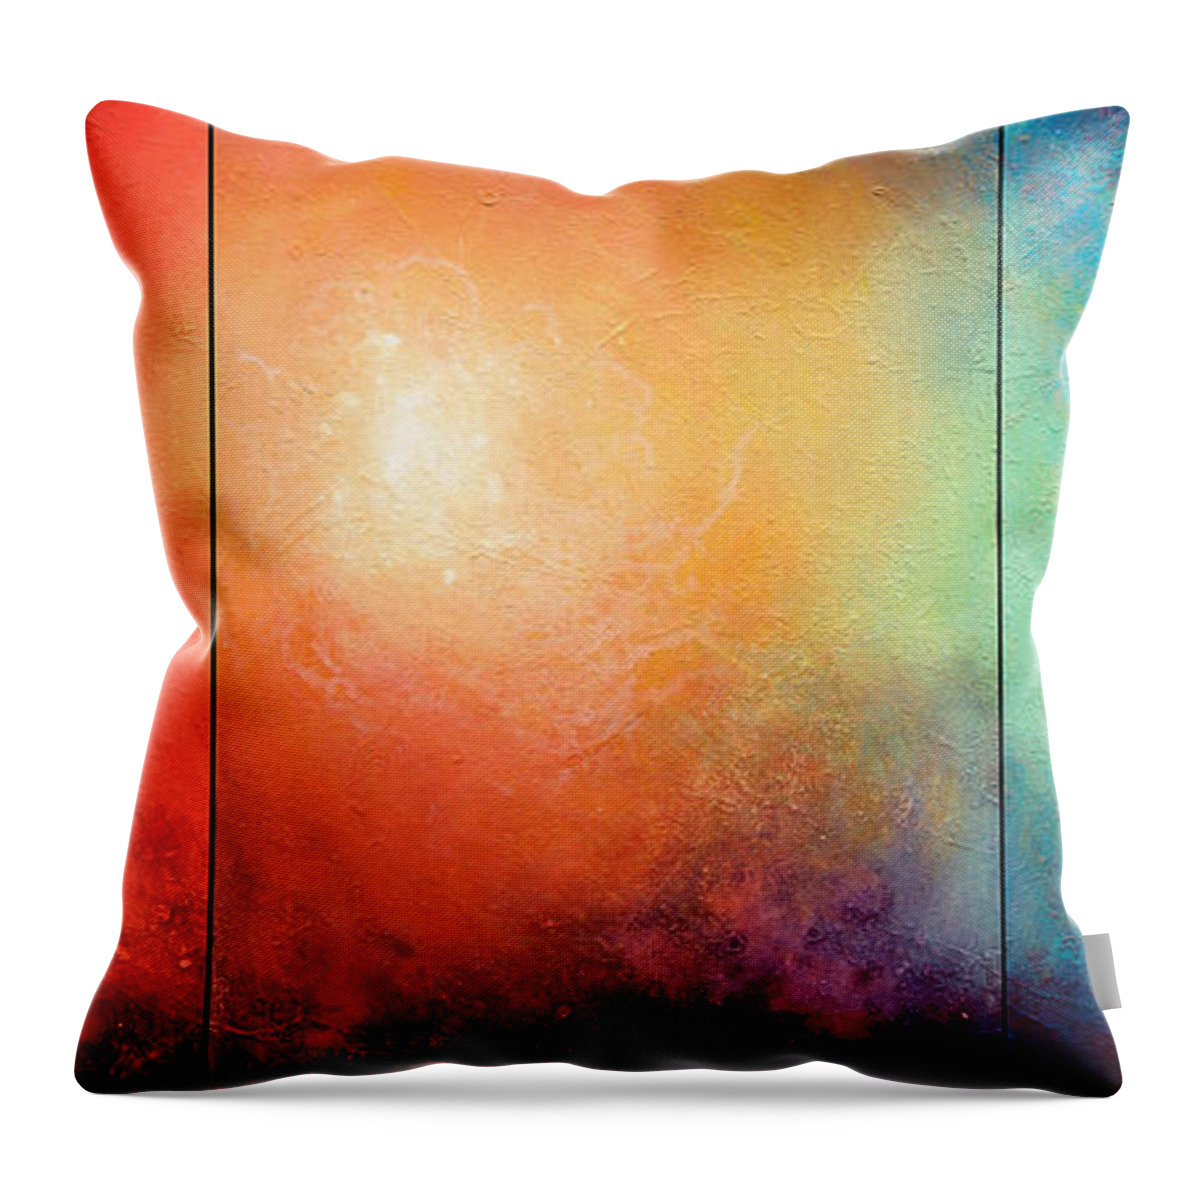 Abstract Throw Pillow featuring the painting One Verse by Jaison Cianelli